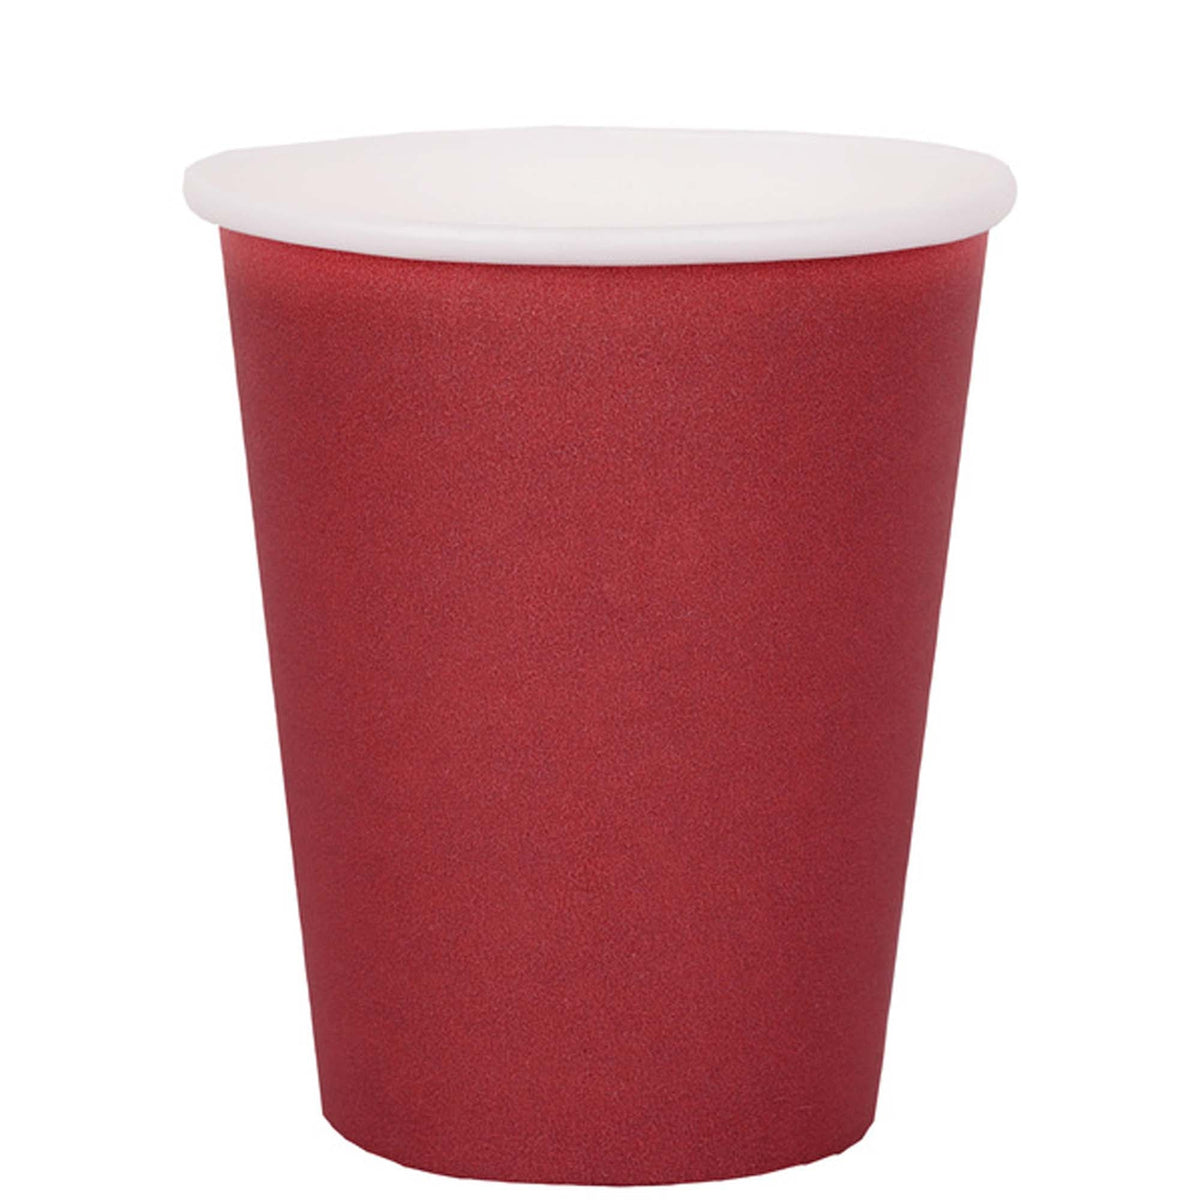 SANTEX Everyday Entertaining Burgundy Red Party Paper Cups, 9 Oz, 10 Count 3660380072997